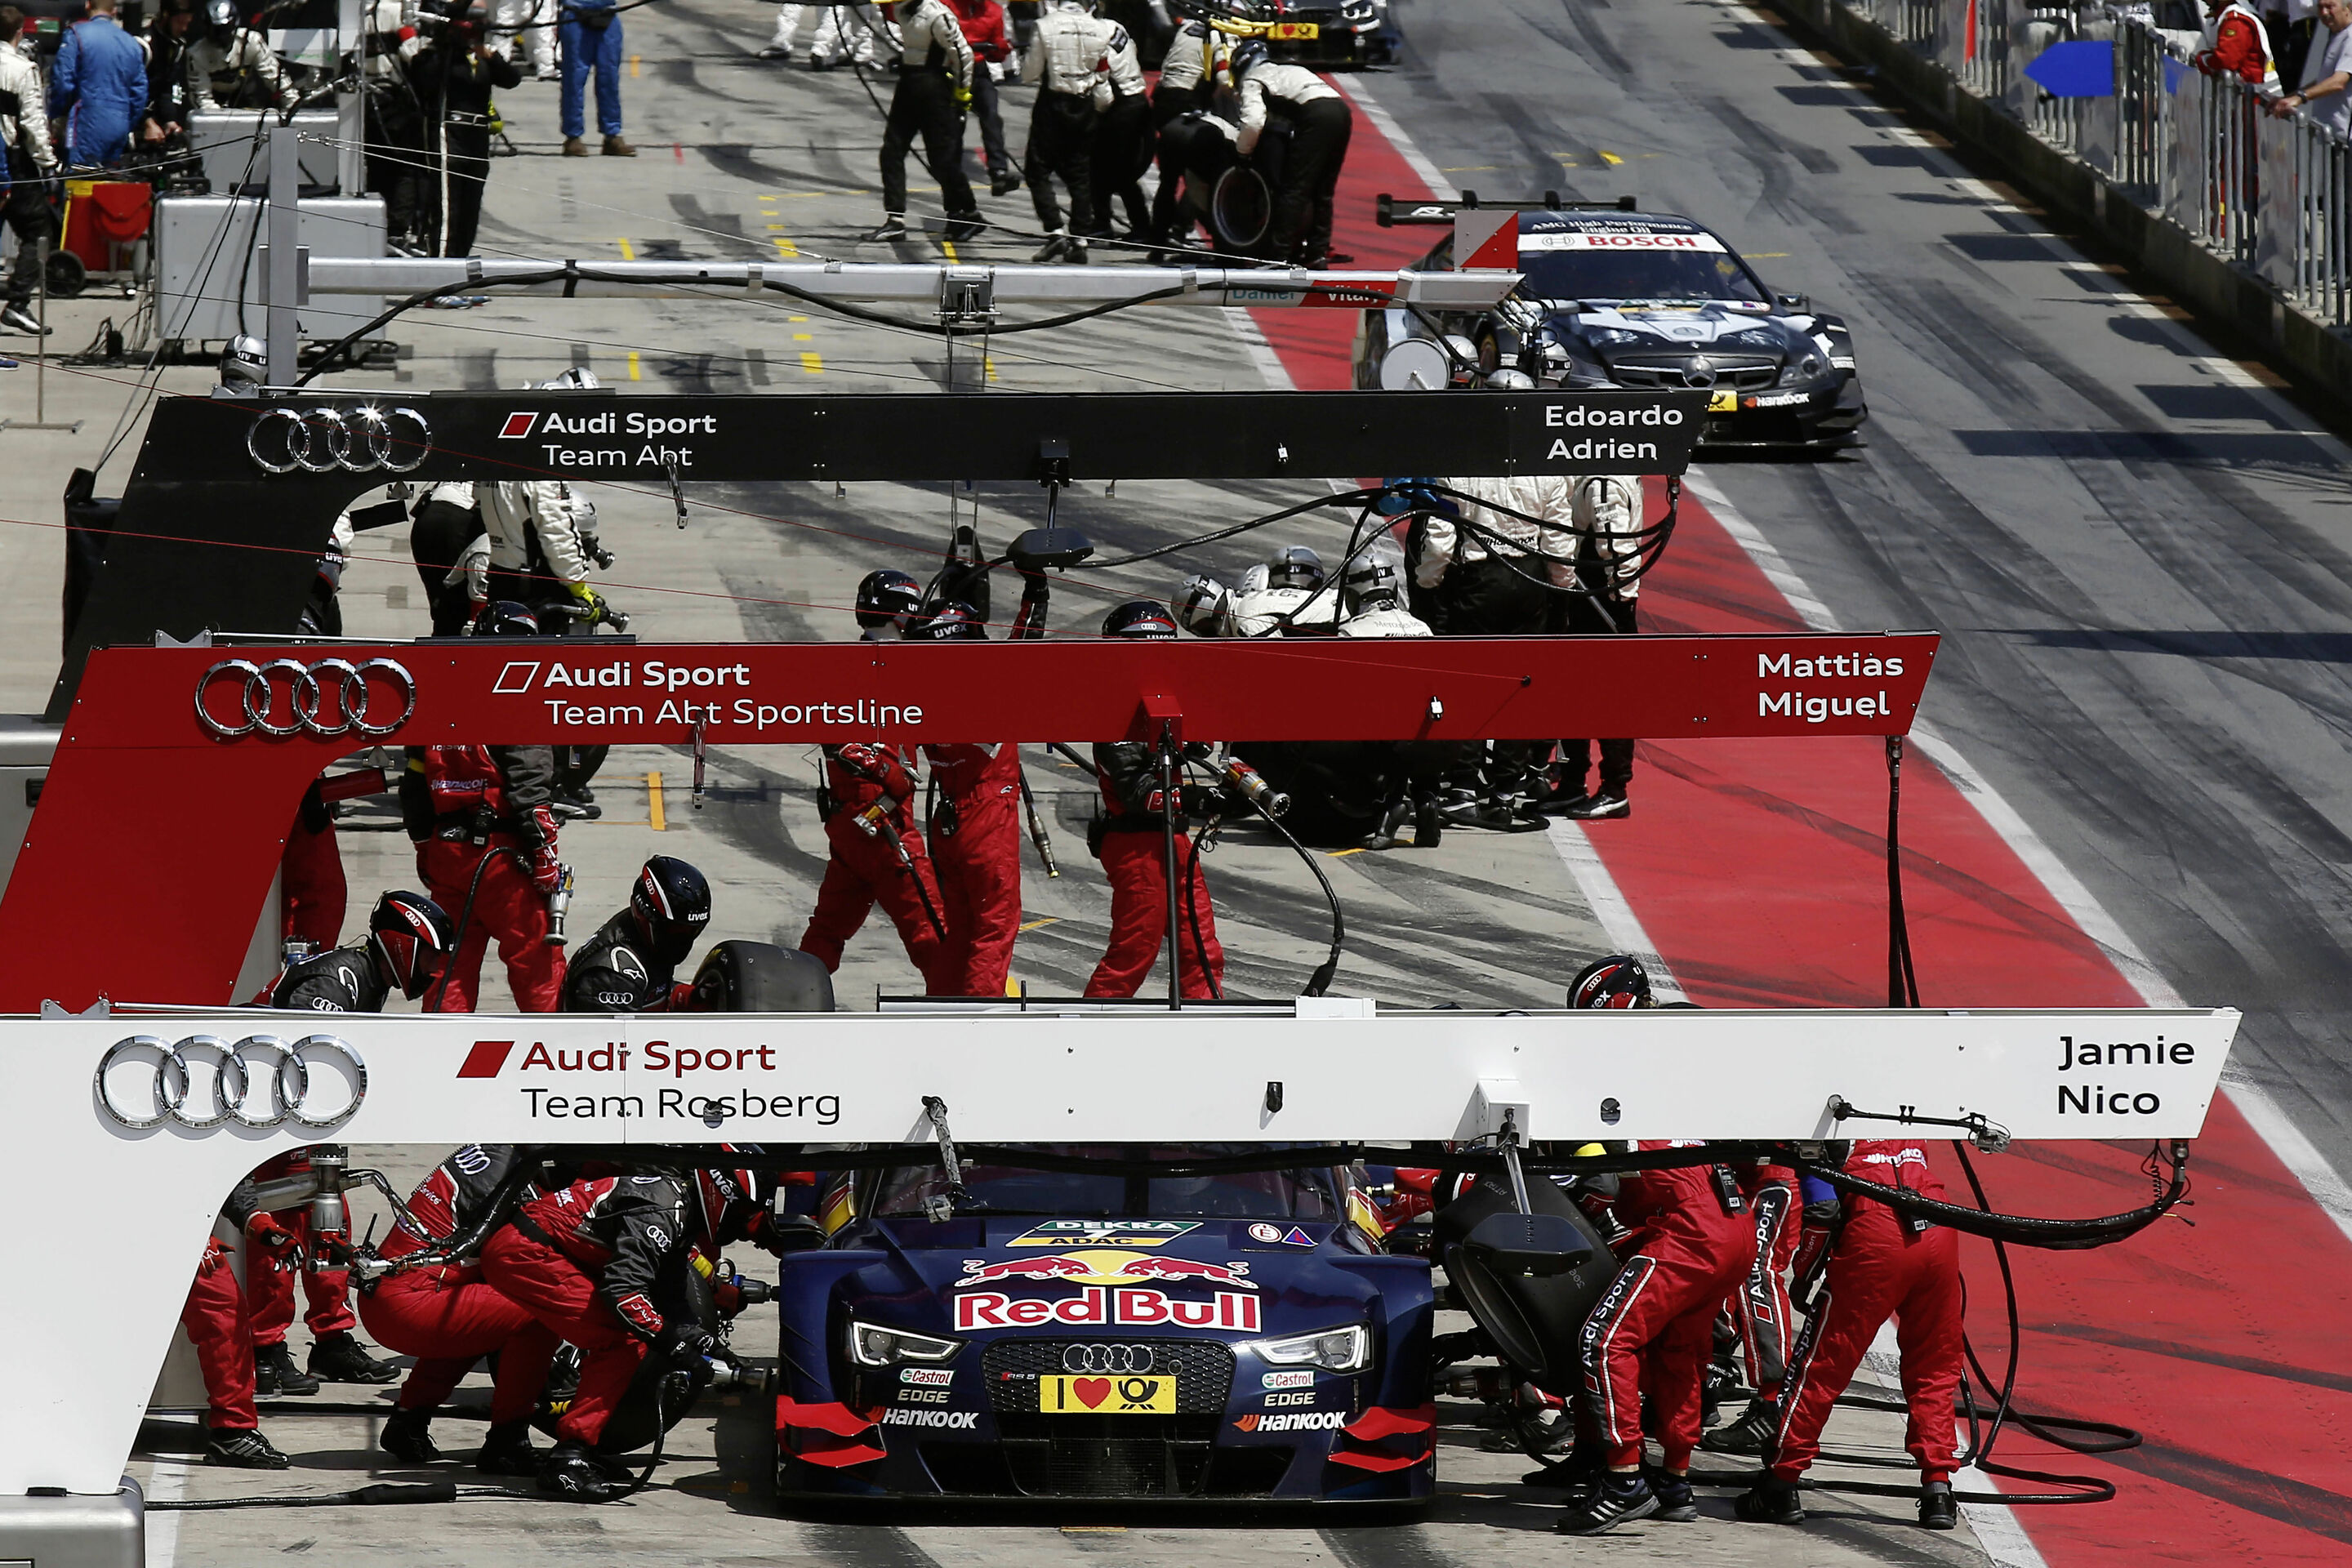 Quotes after the race at the Red Bull Ring